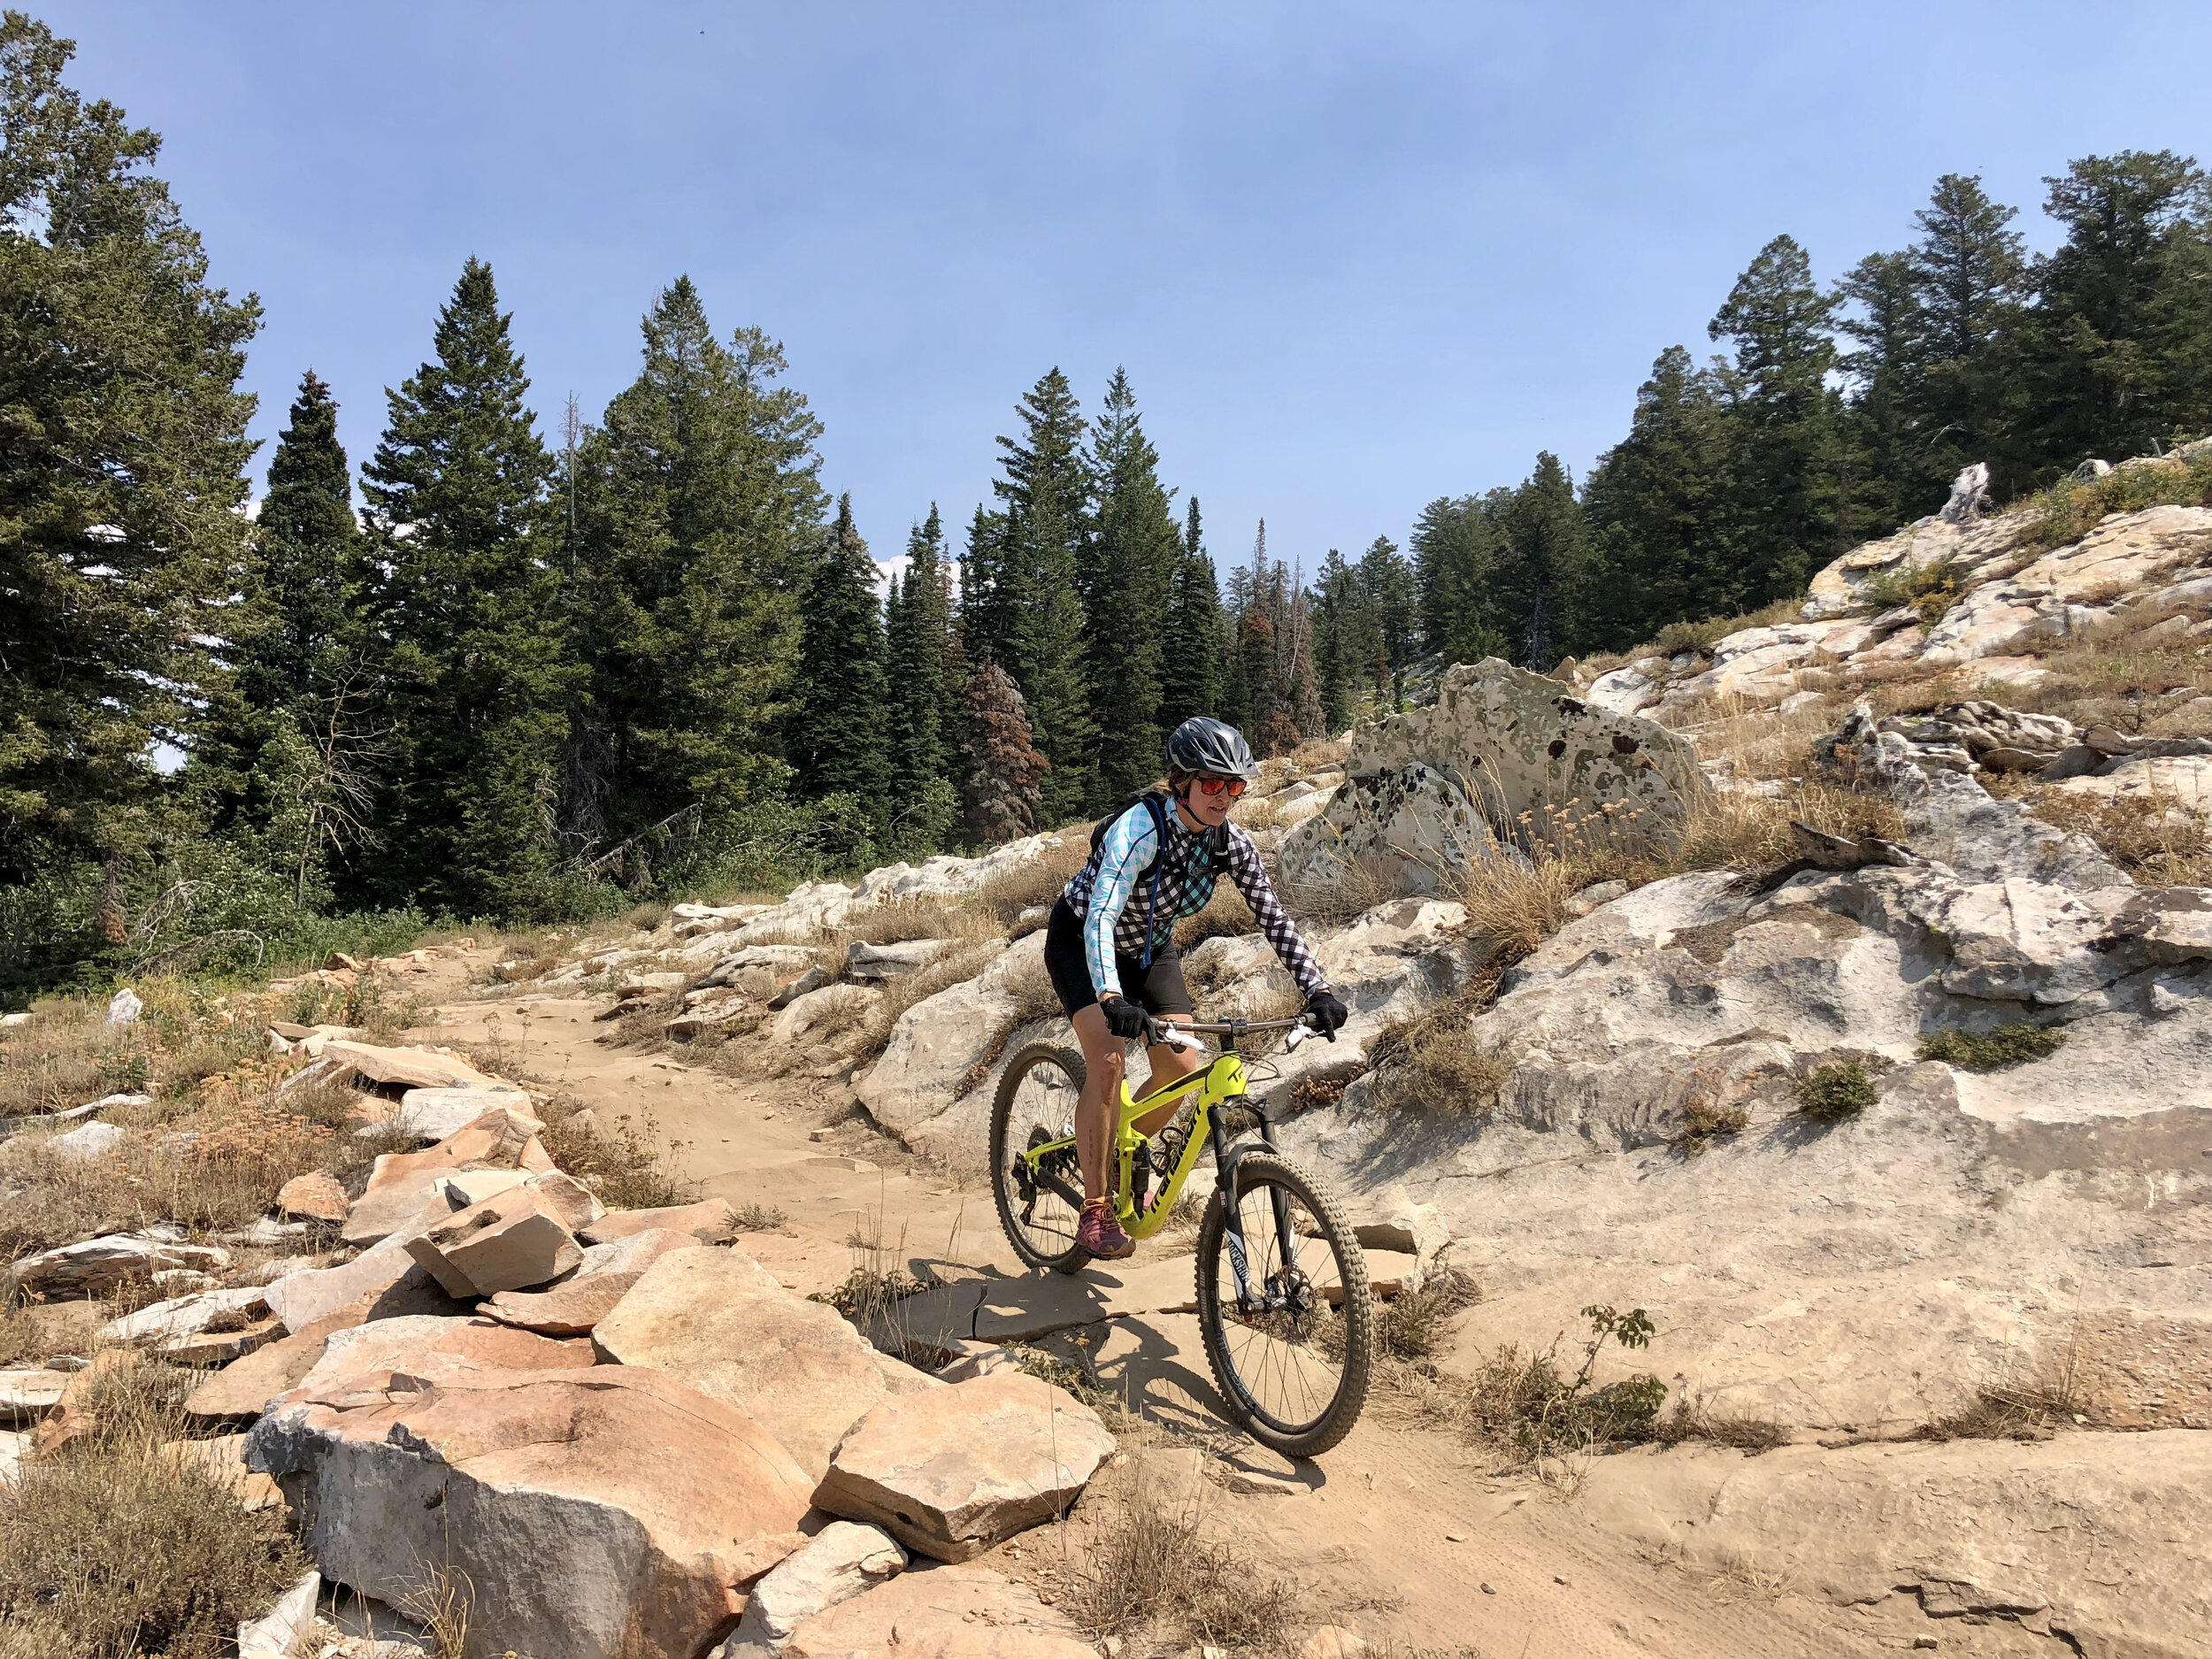 What kind of terrain is suitable for beginner mountain e-bike riders?